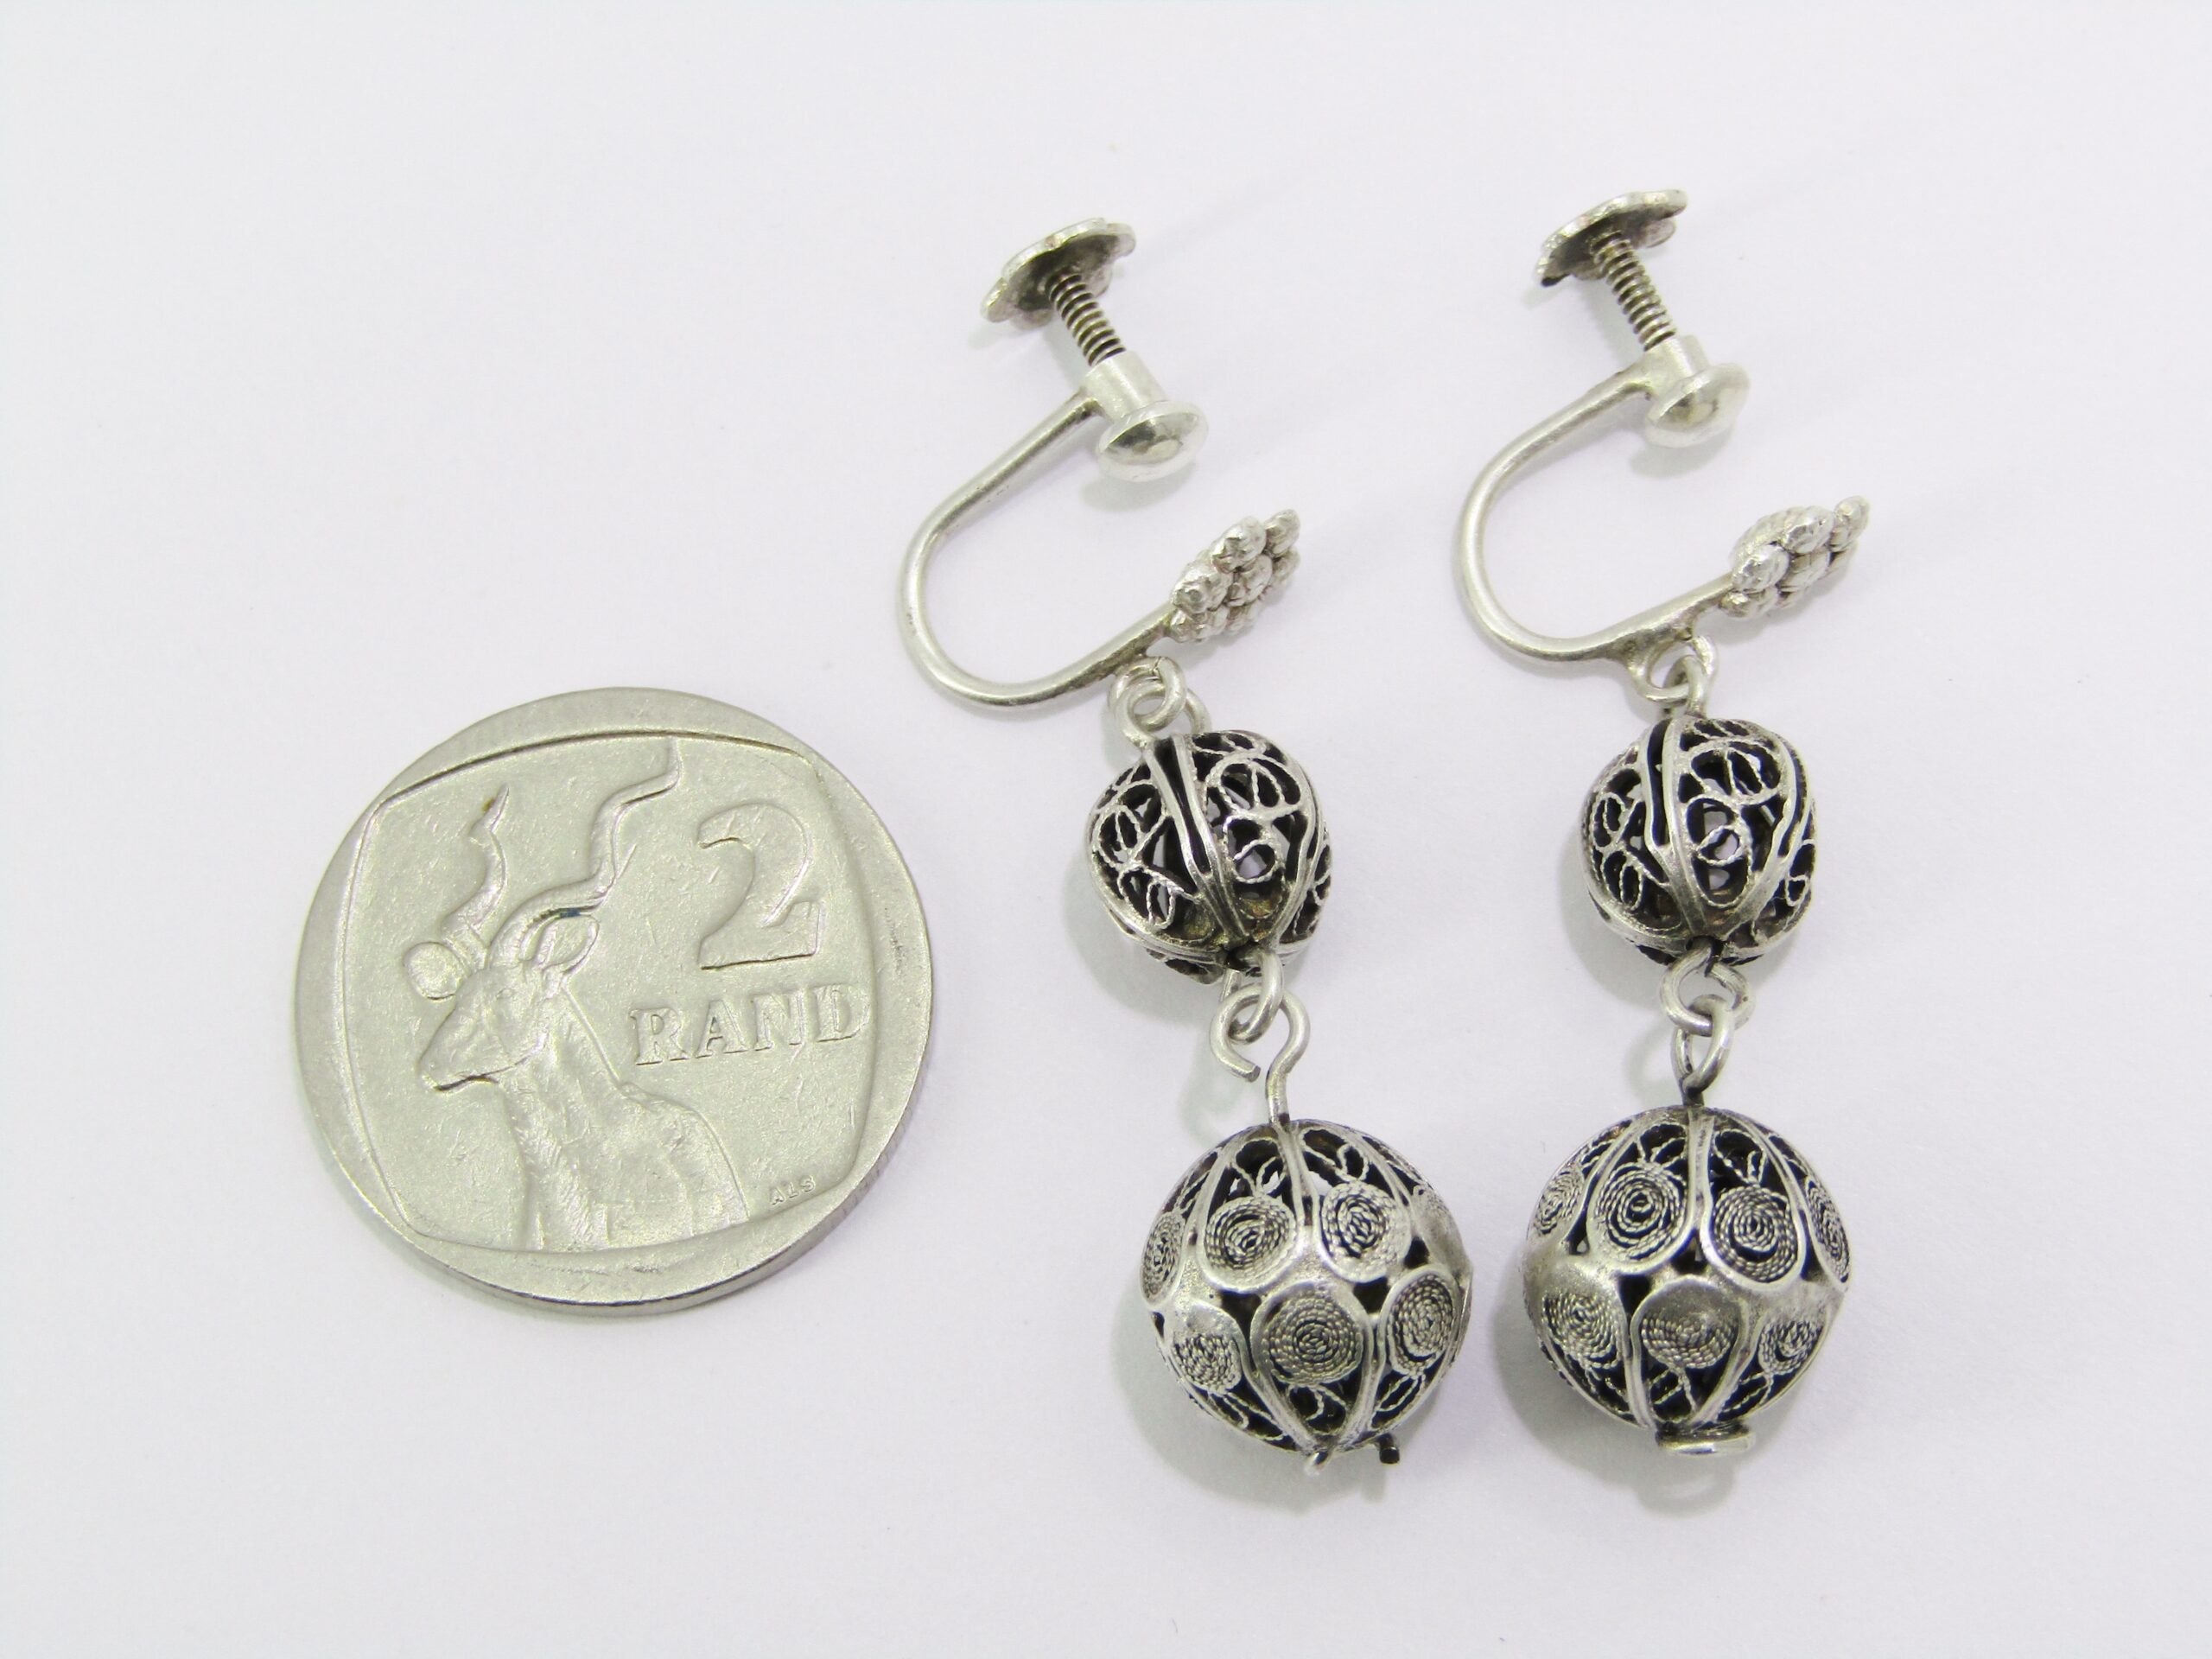 A Gorgeous Pair of Vintage Design Filigree Ball Earrings in Sterling Silver.